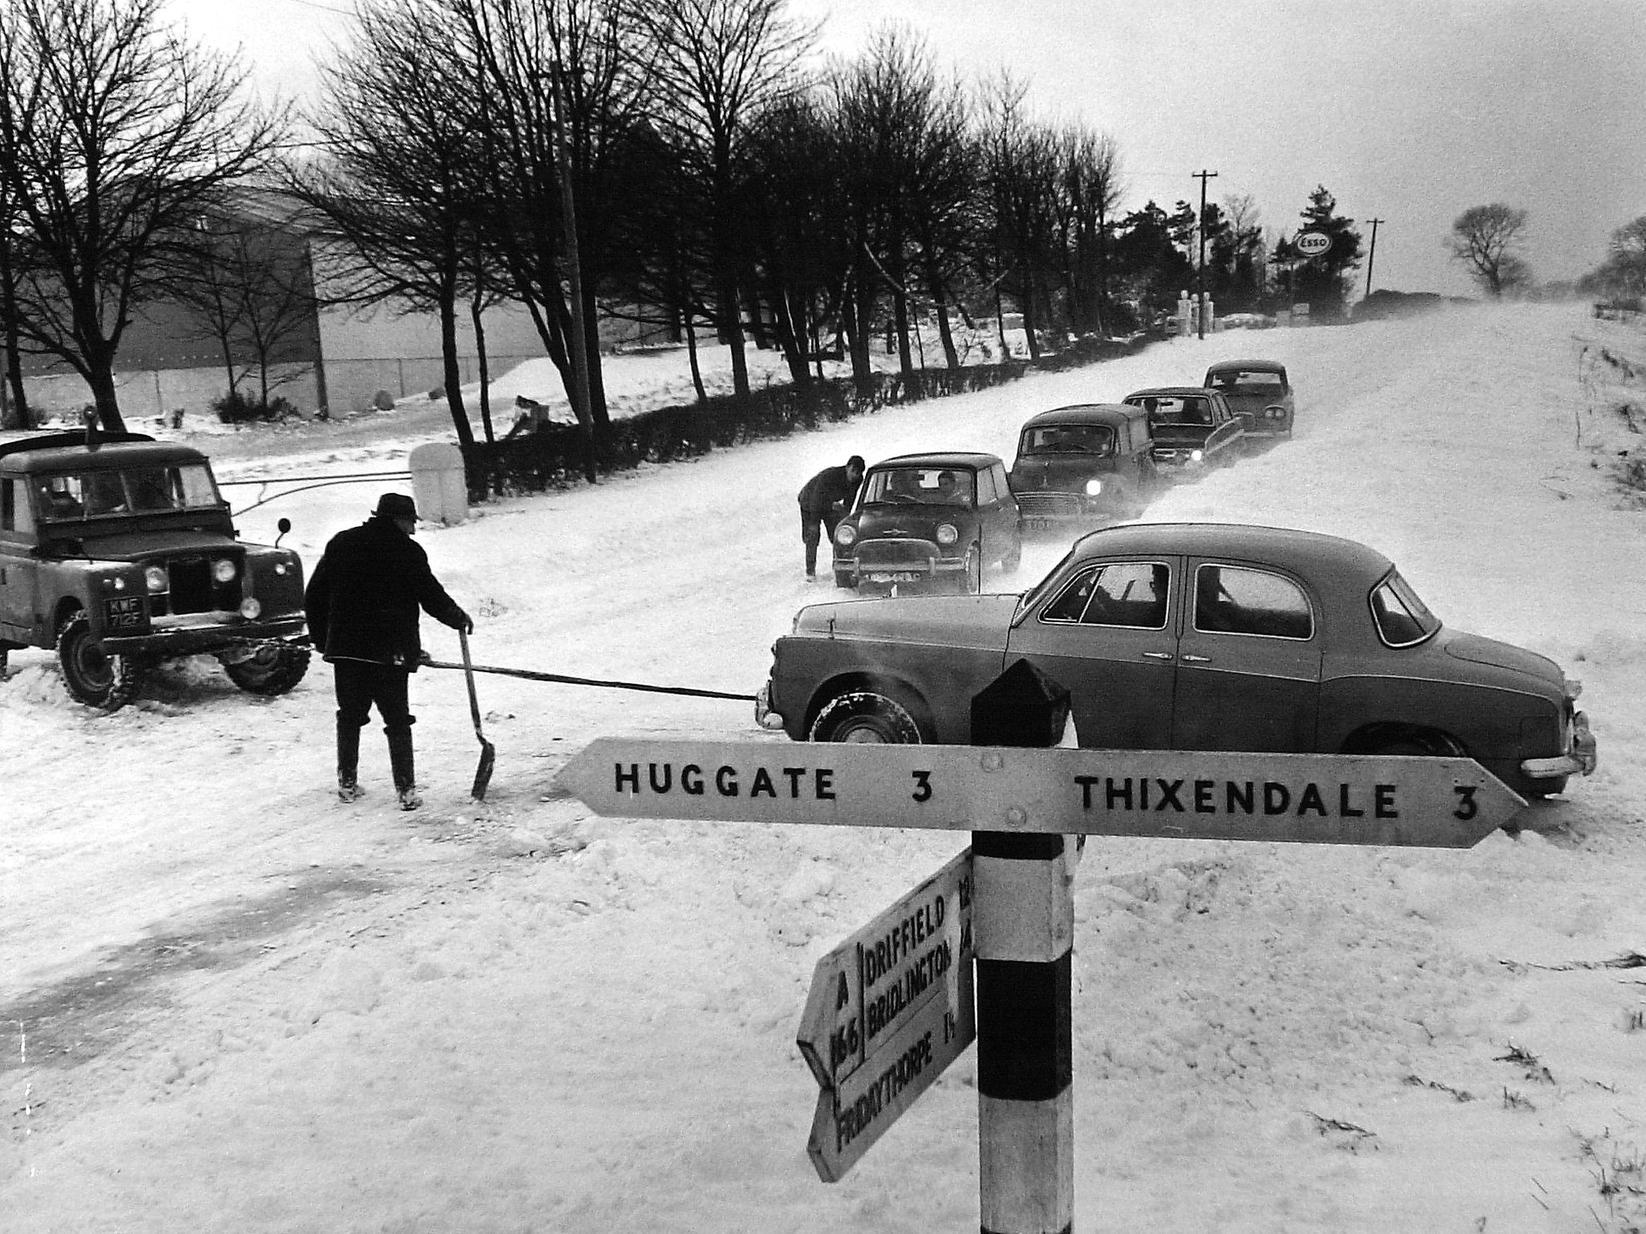 This is Fridaythorpe Road near Garrowby Hill in December 1968. Share your snowy memories with Andrew Hutchinson via email at: andrew.hutchinson@jpress.co.uk or tweet him - @AndyHutchYPN